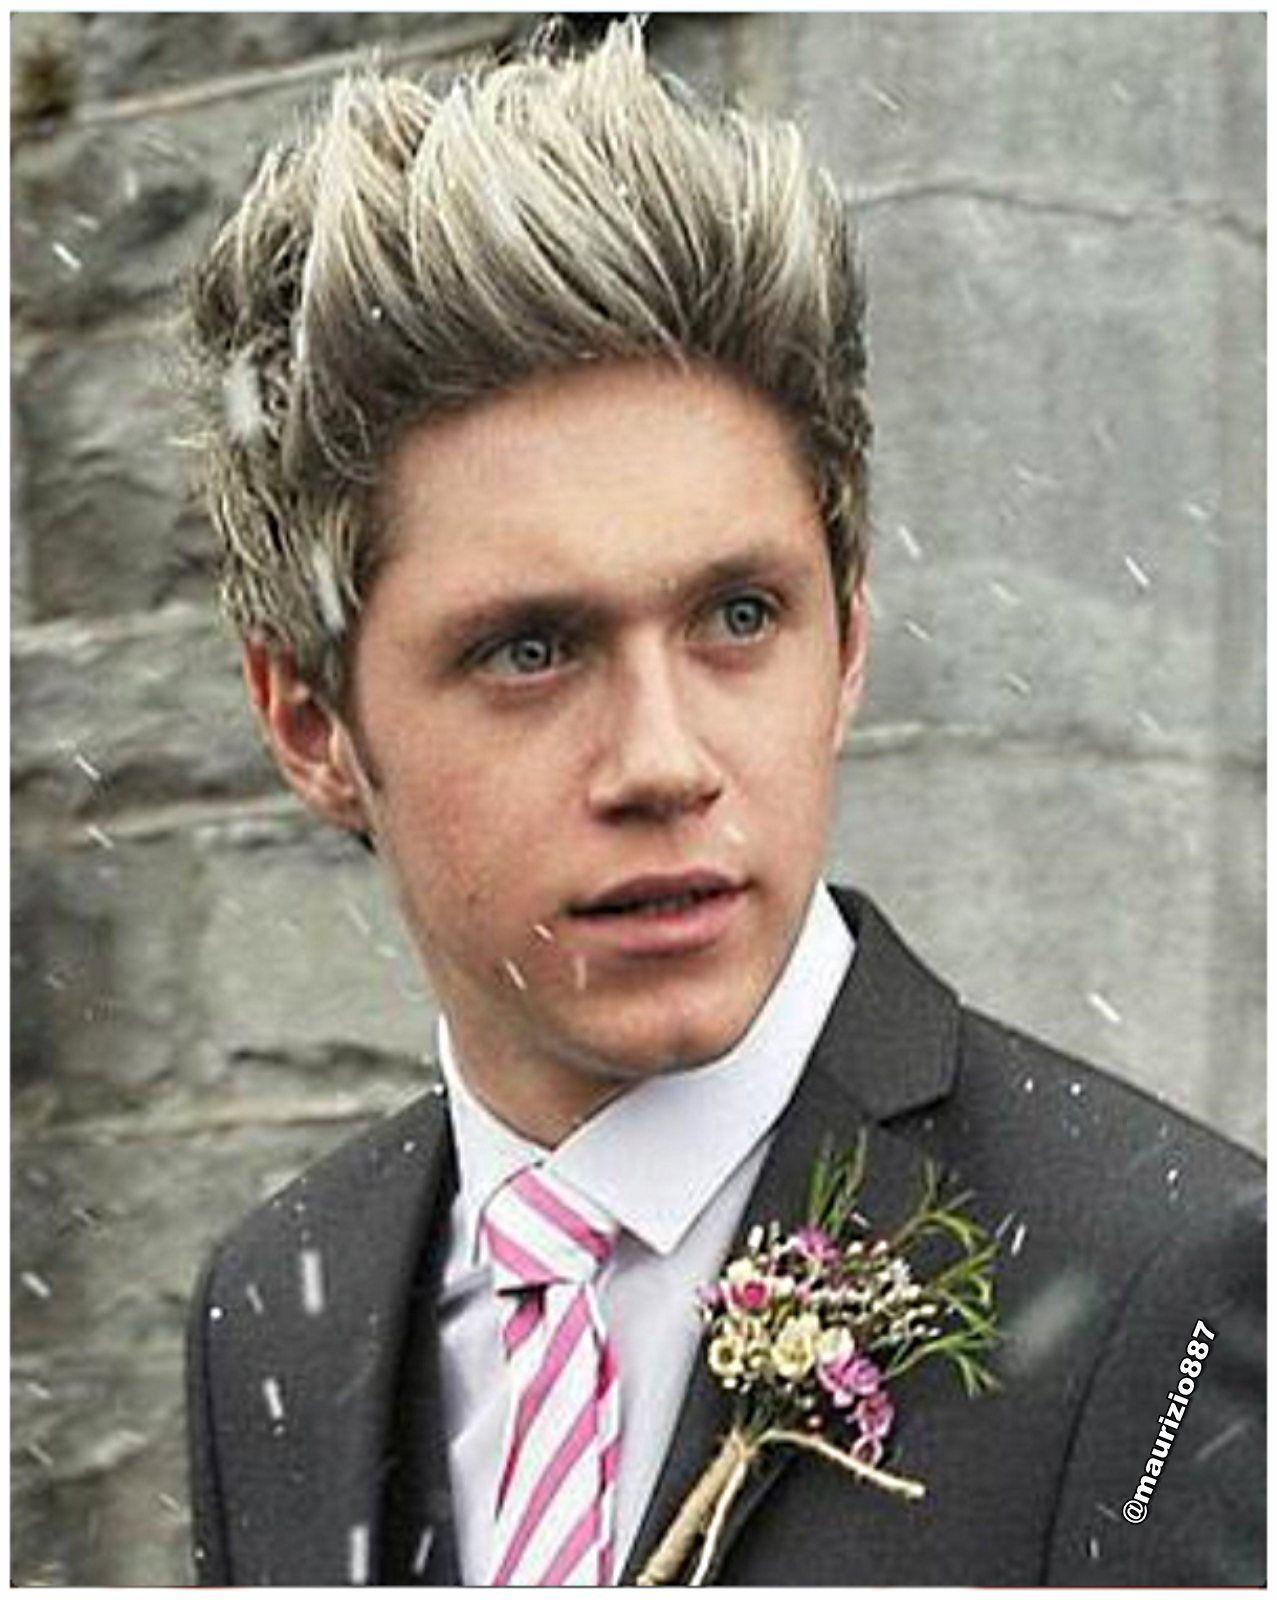 Niall Horan One Direction (id: 141951)